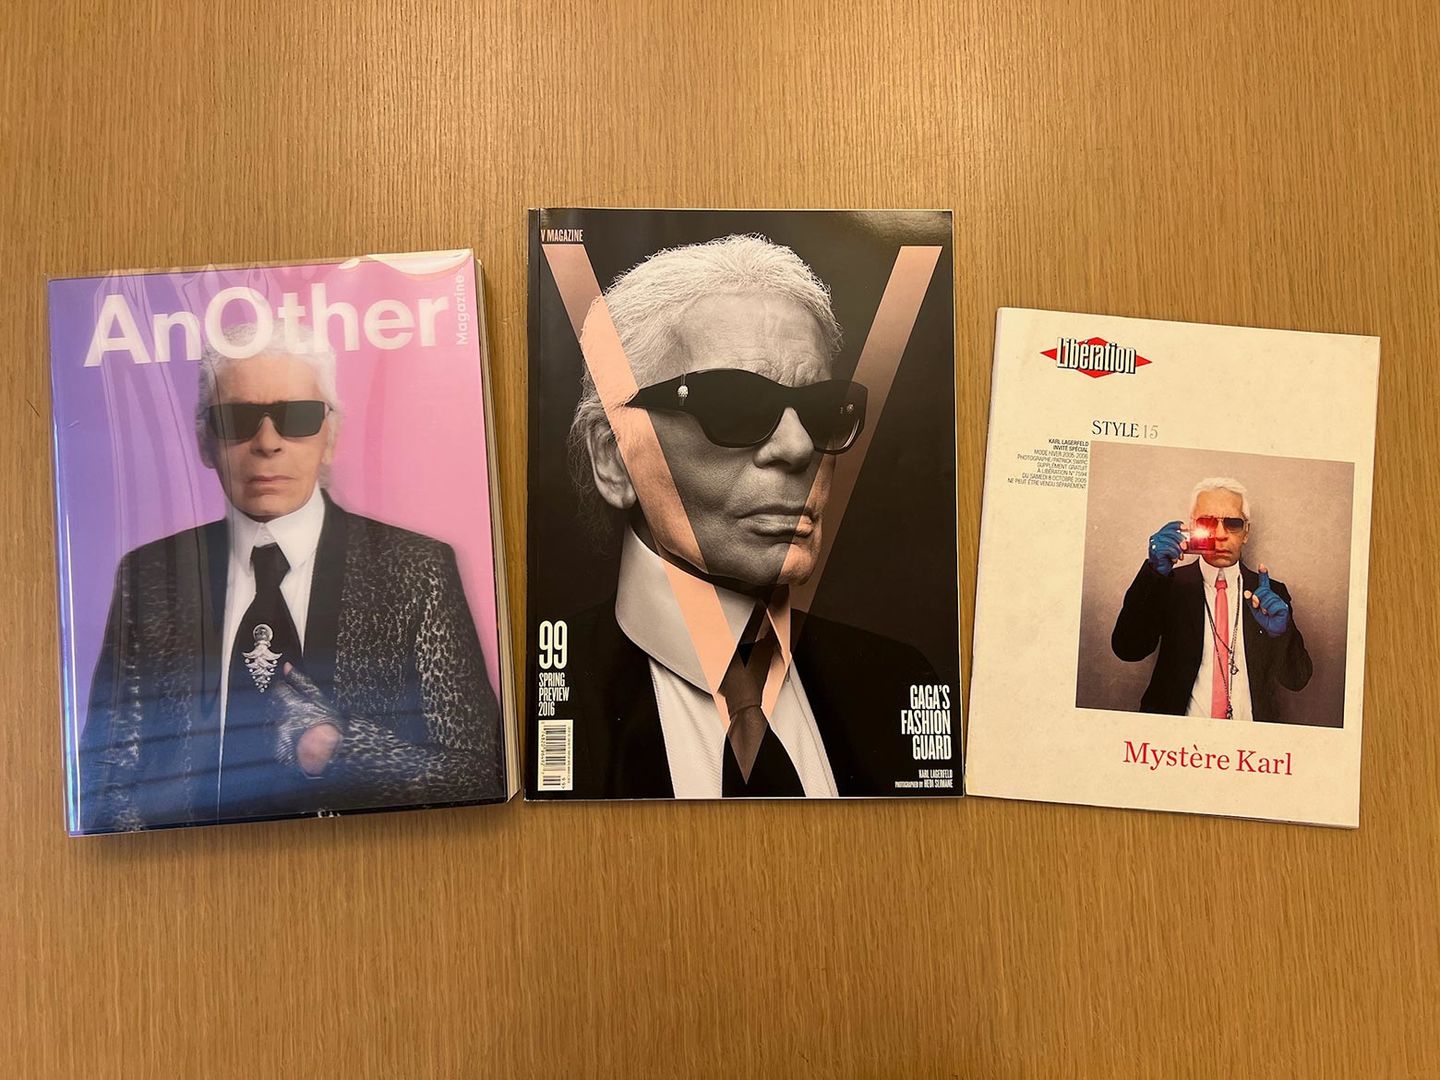 Three book covers featuring Lagerfeld